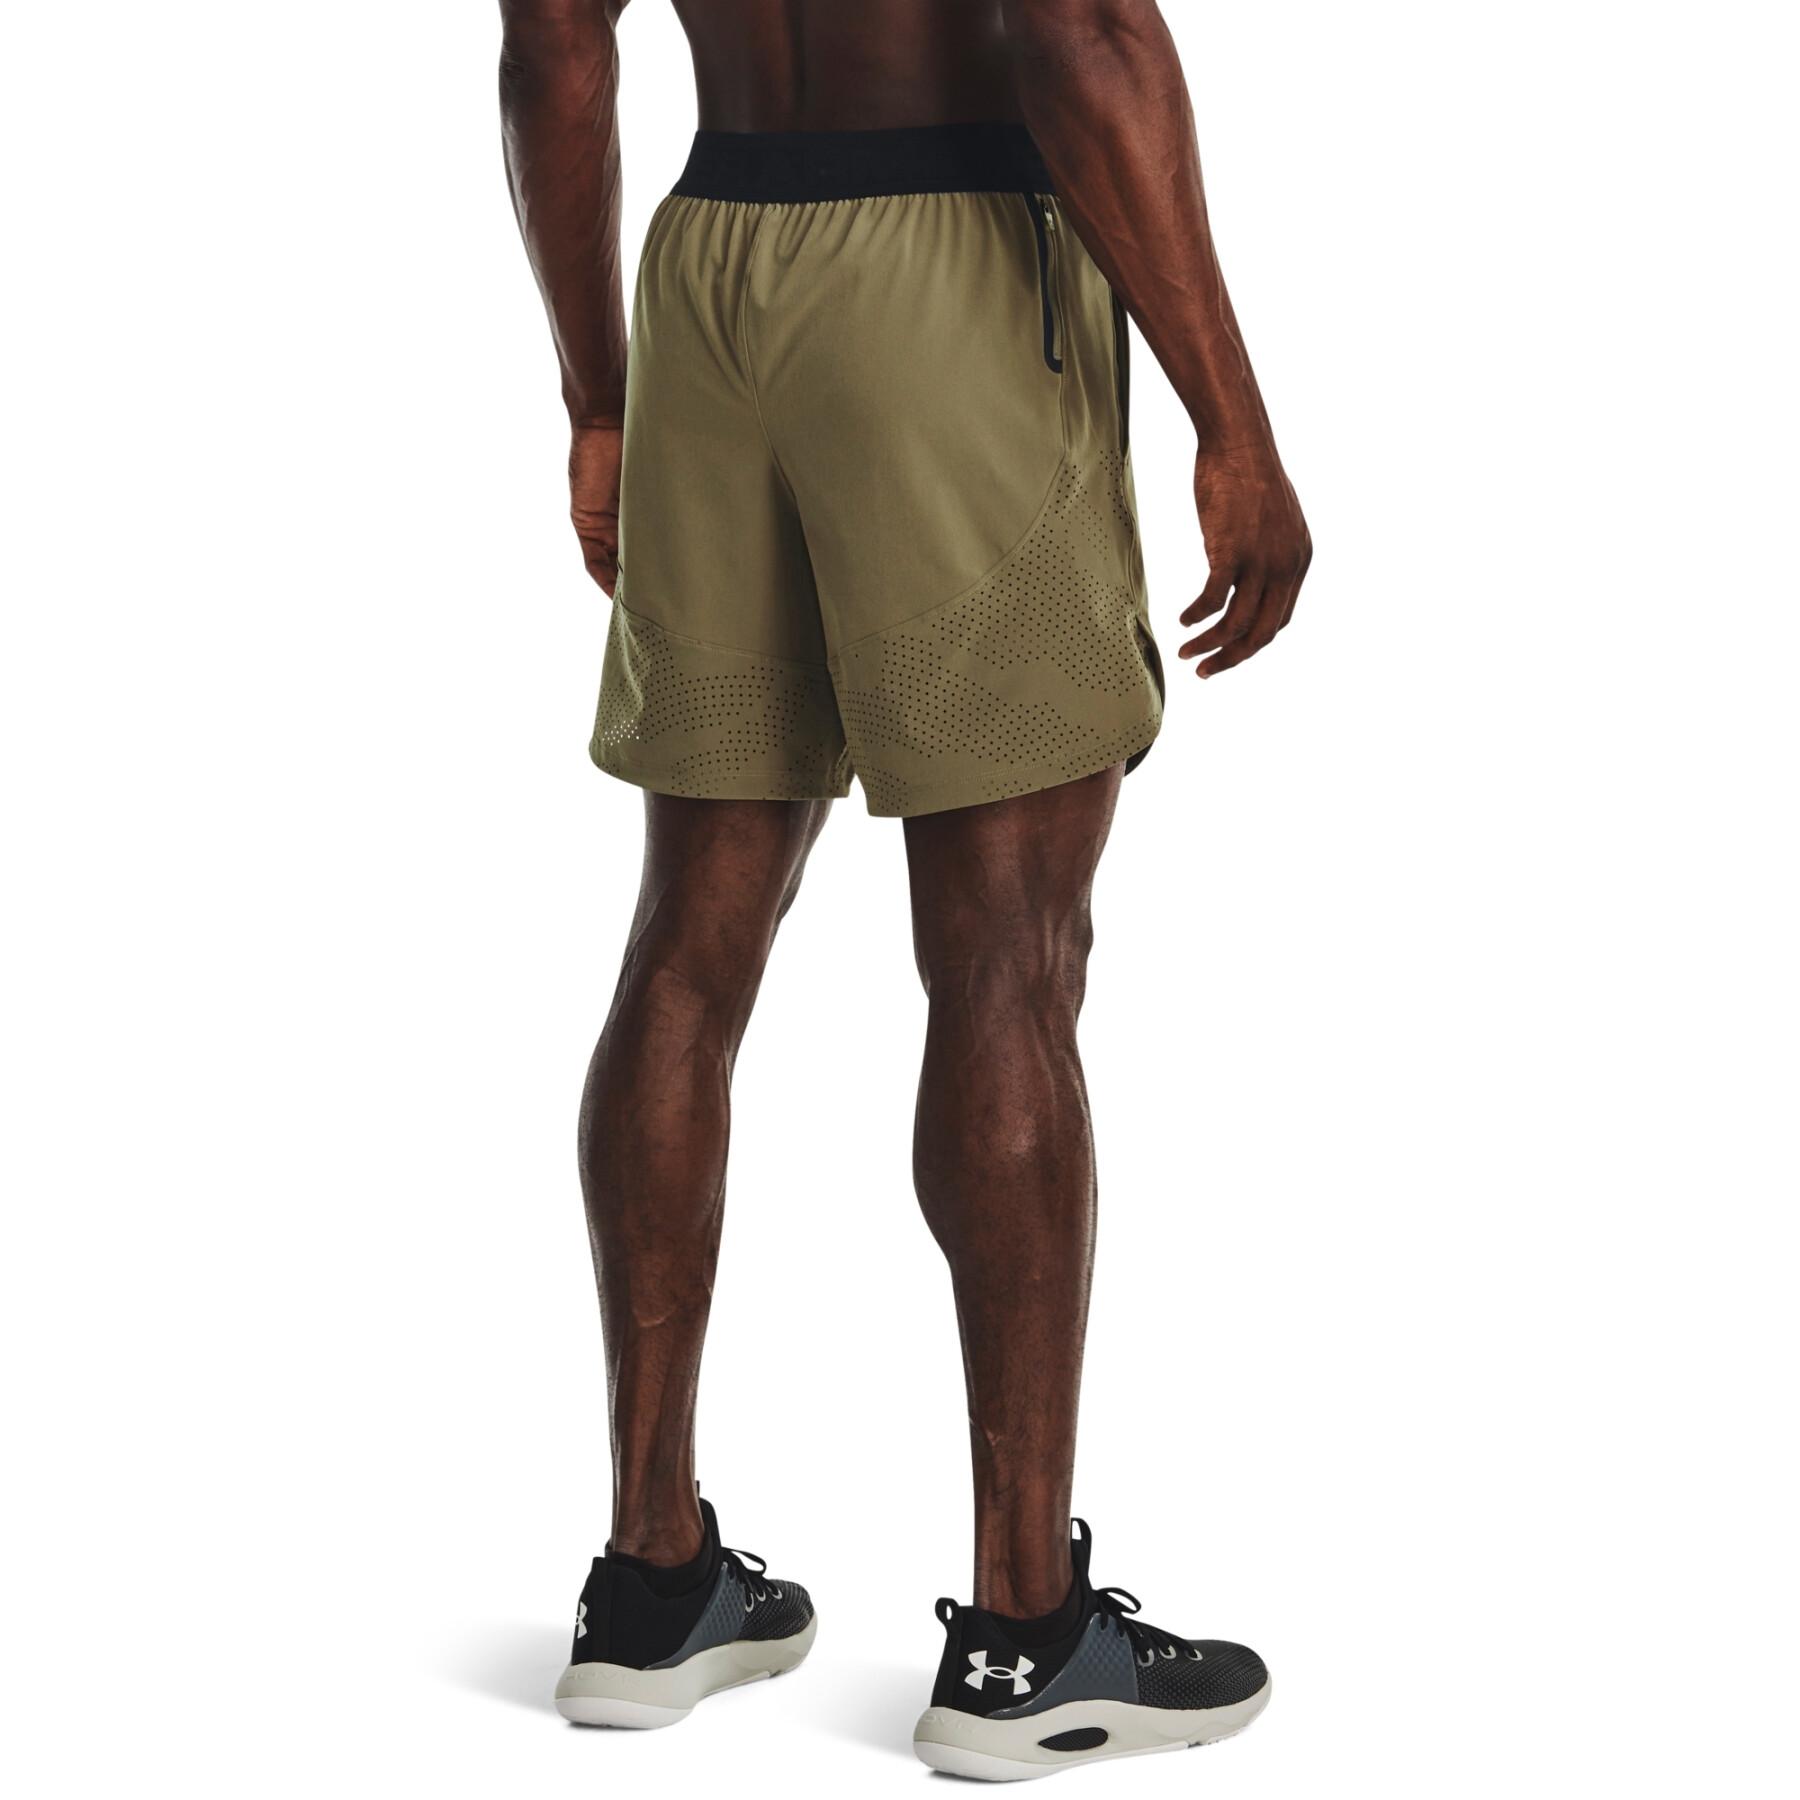 Woven shorts Under Armour Stretch